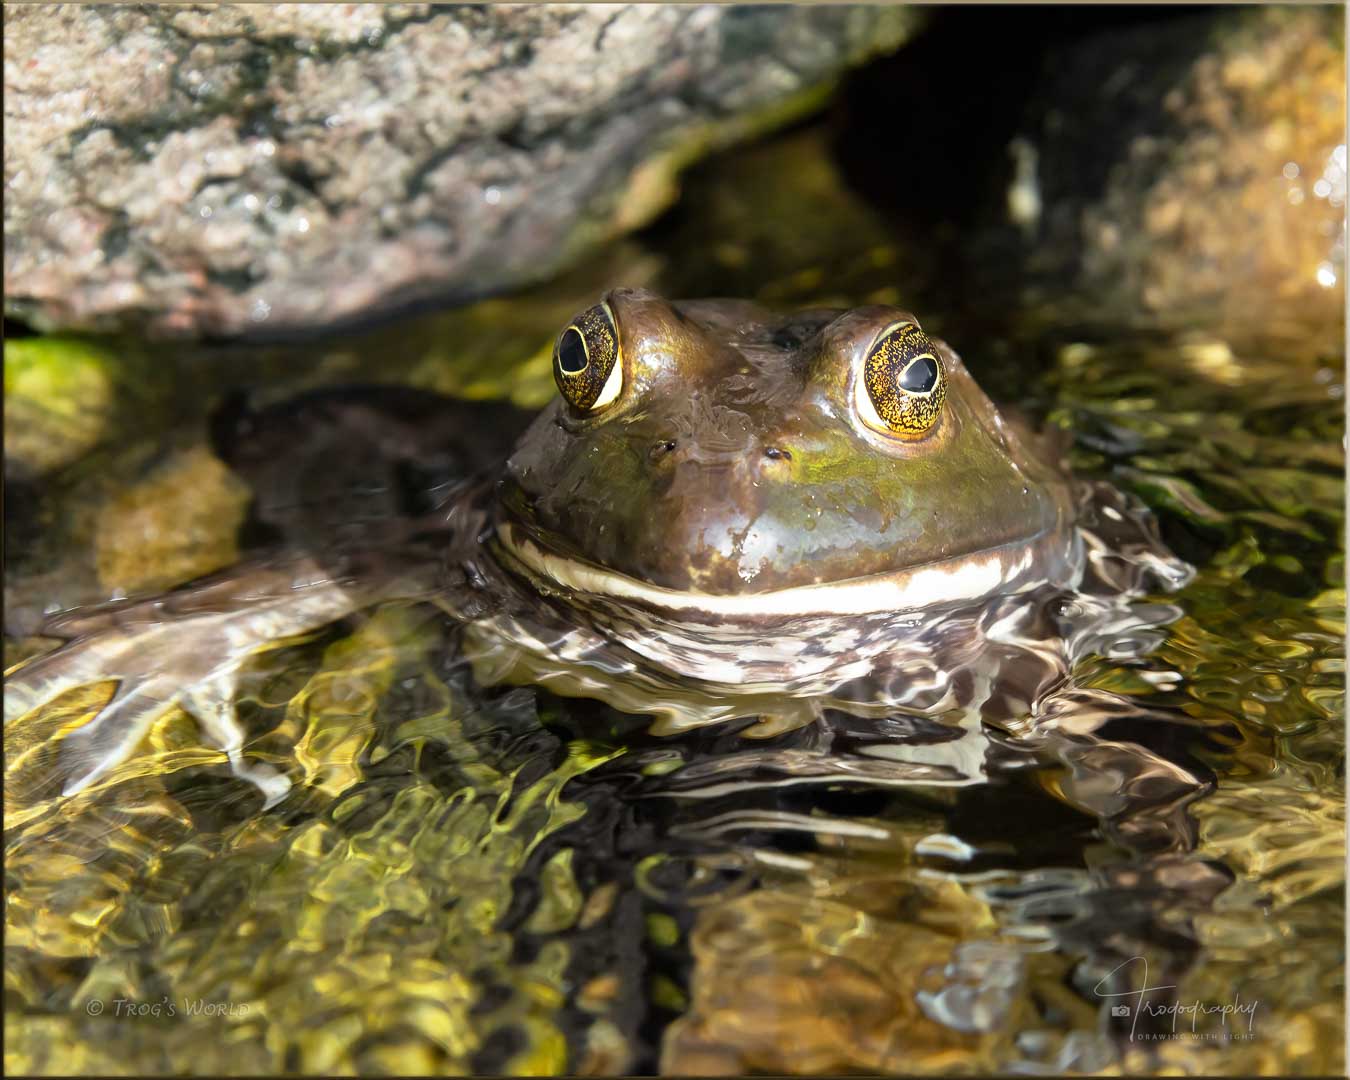 Bullfrog sitting in the water among the rocks